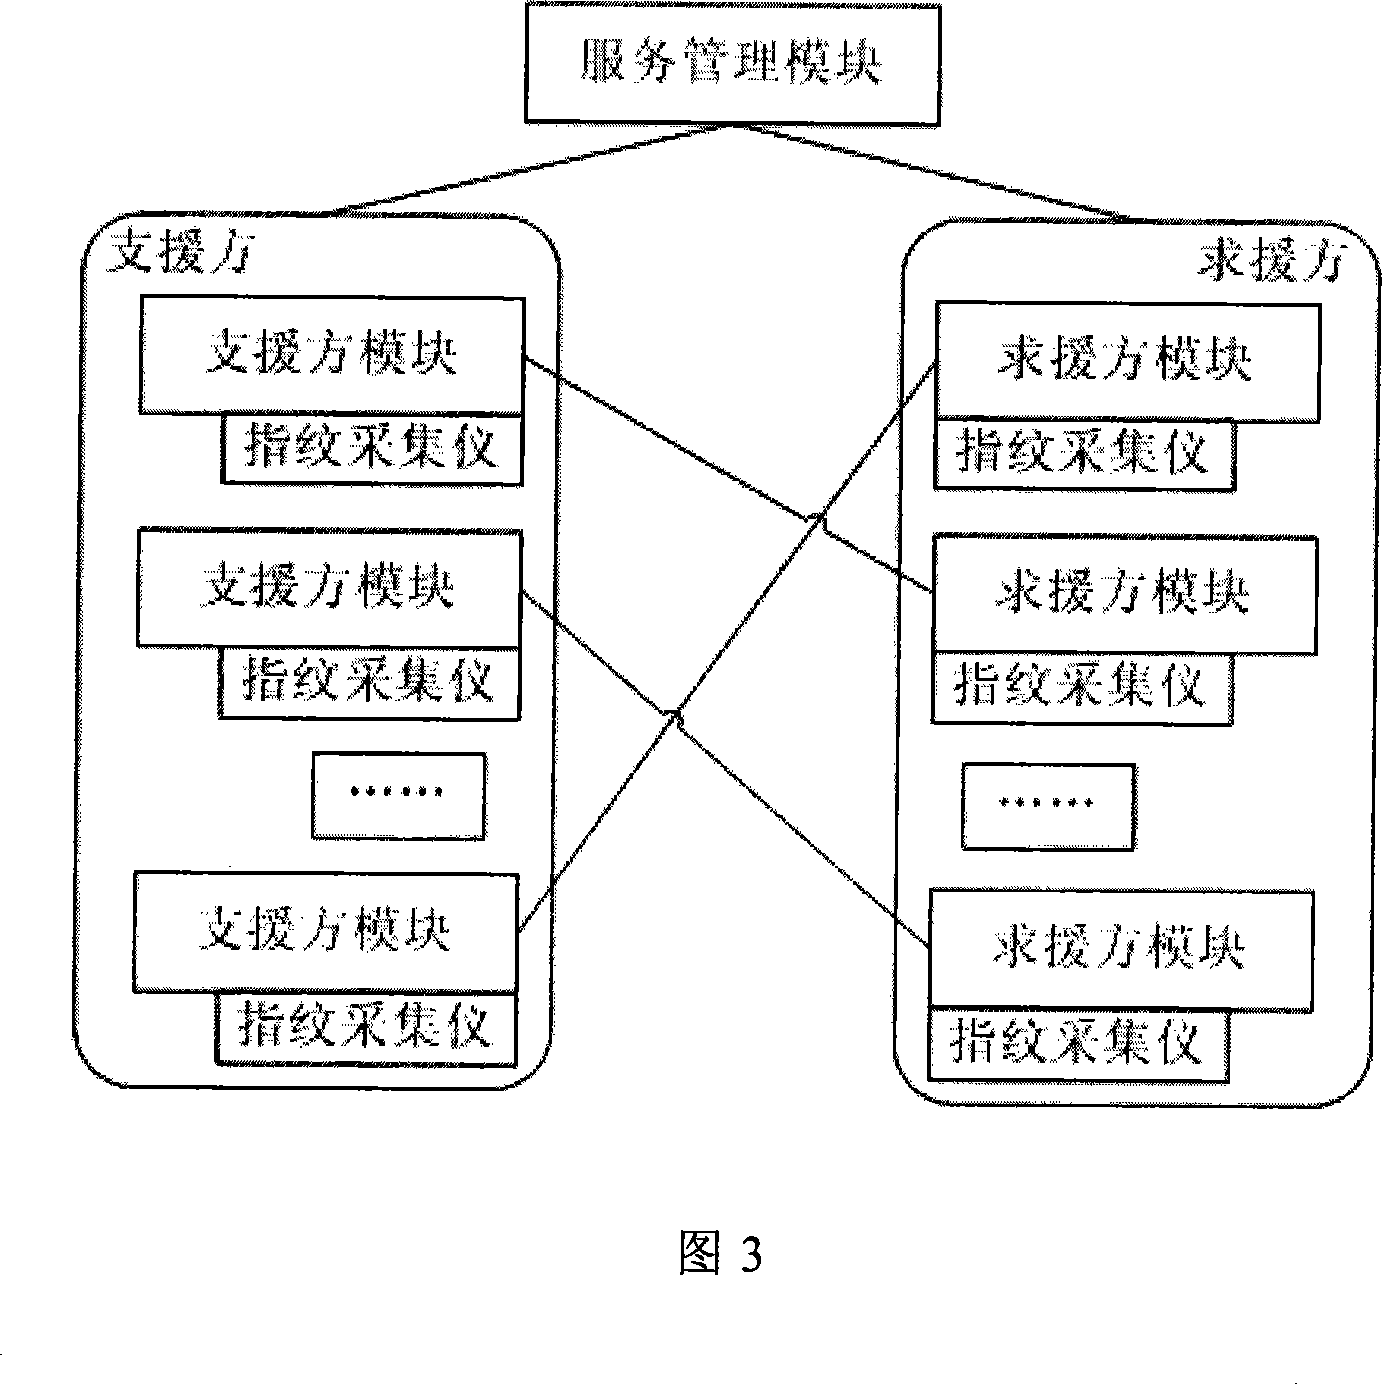 Remote assisting method and system